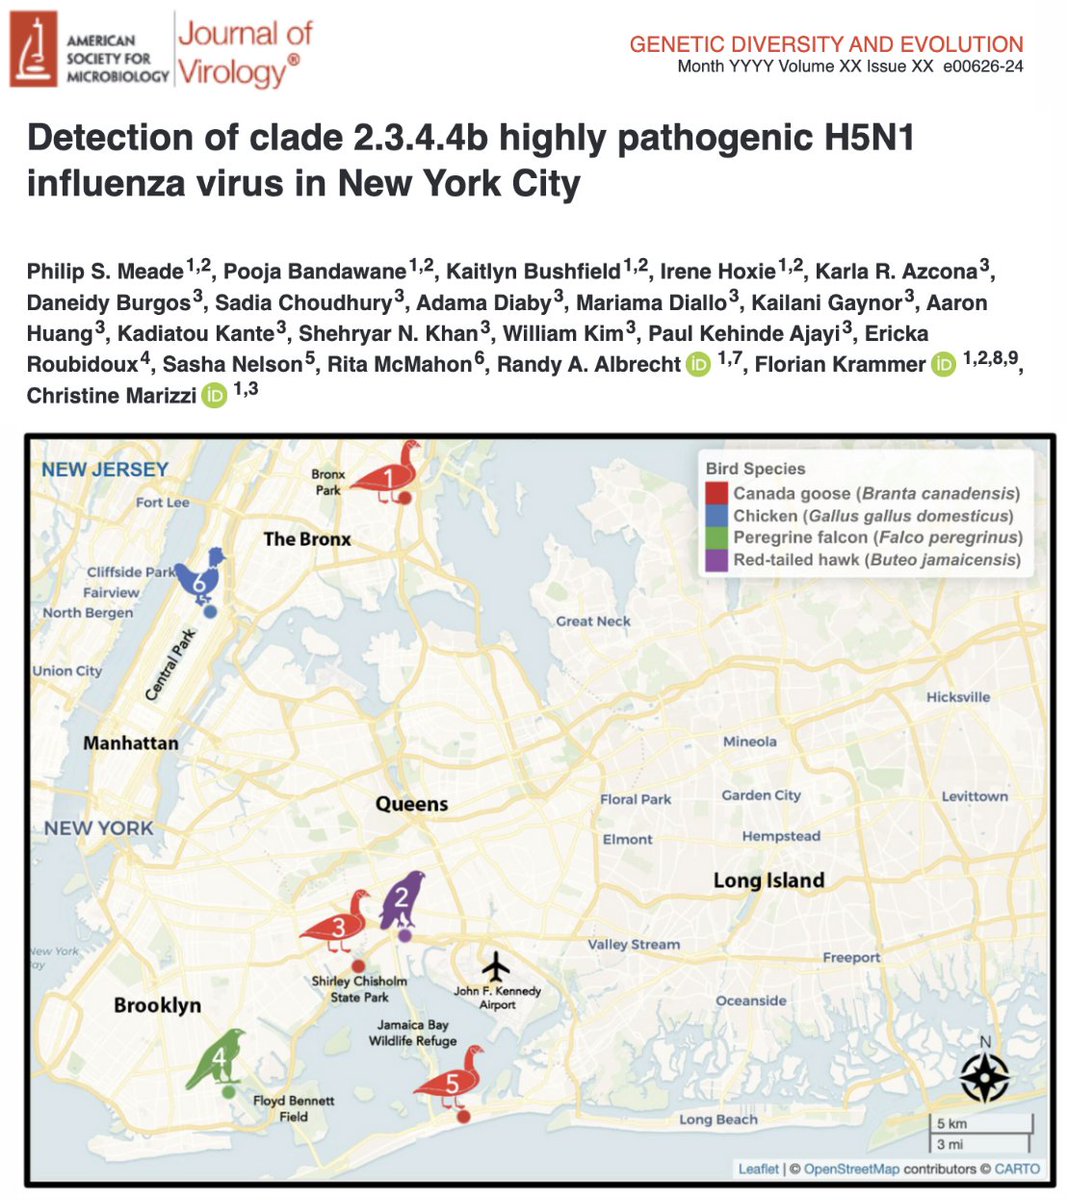 H5N1 Bird Flu (clade 2.3.4.4b) detected in various species of birds in New York City. The authors state, 'The presence of the virus poses a low but non-zero risk for humans and pets'. Clade 2.3.4.4 H5N1 has been subject to serial passage (gain-of-function) in mallard ducks at